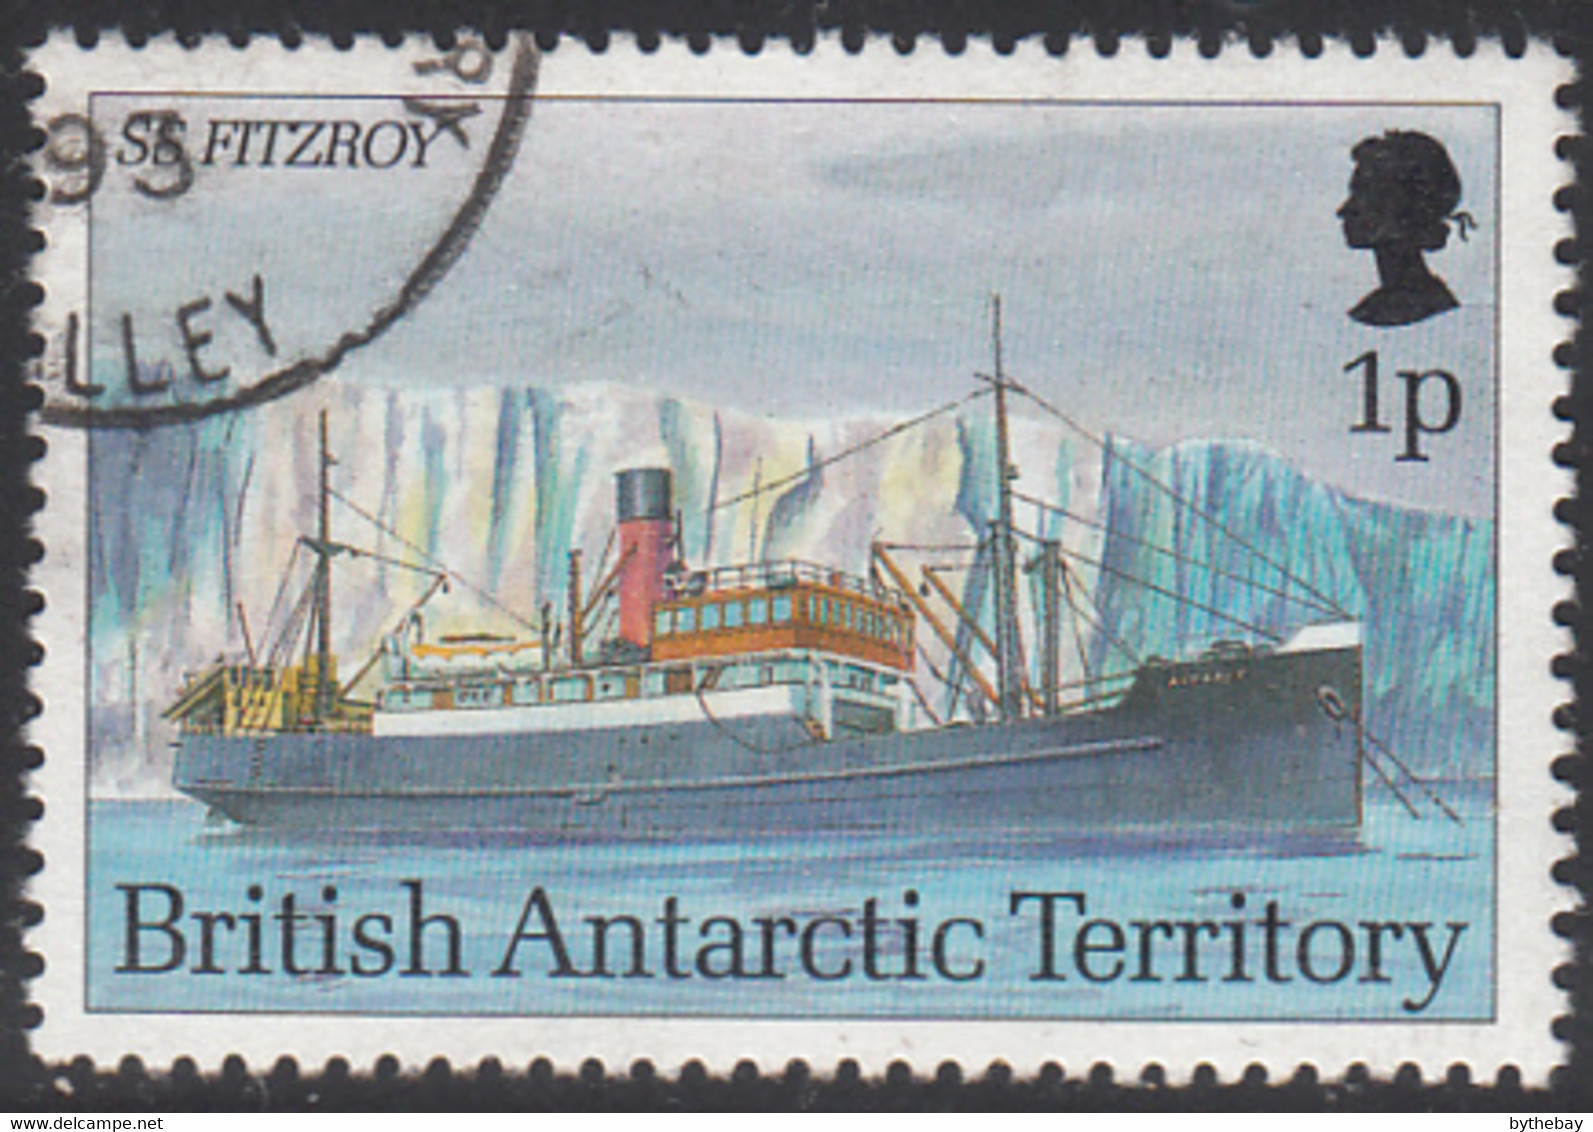 British Antarctic Territory 1993 Used Sc #202 1p SS Fitzroy Research Ships - Usati